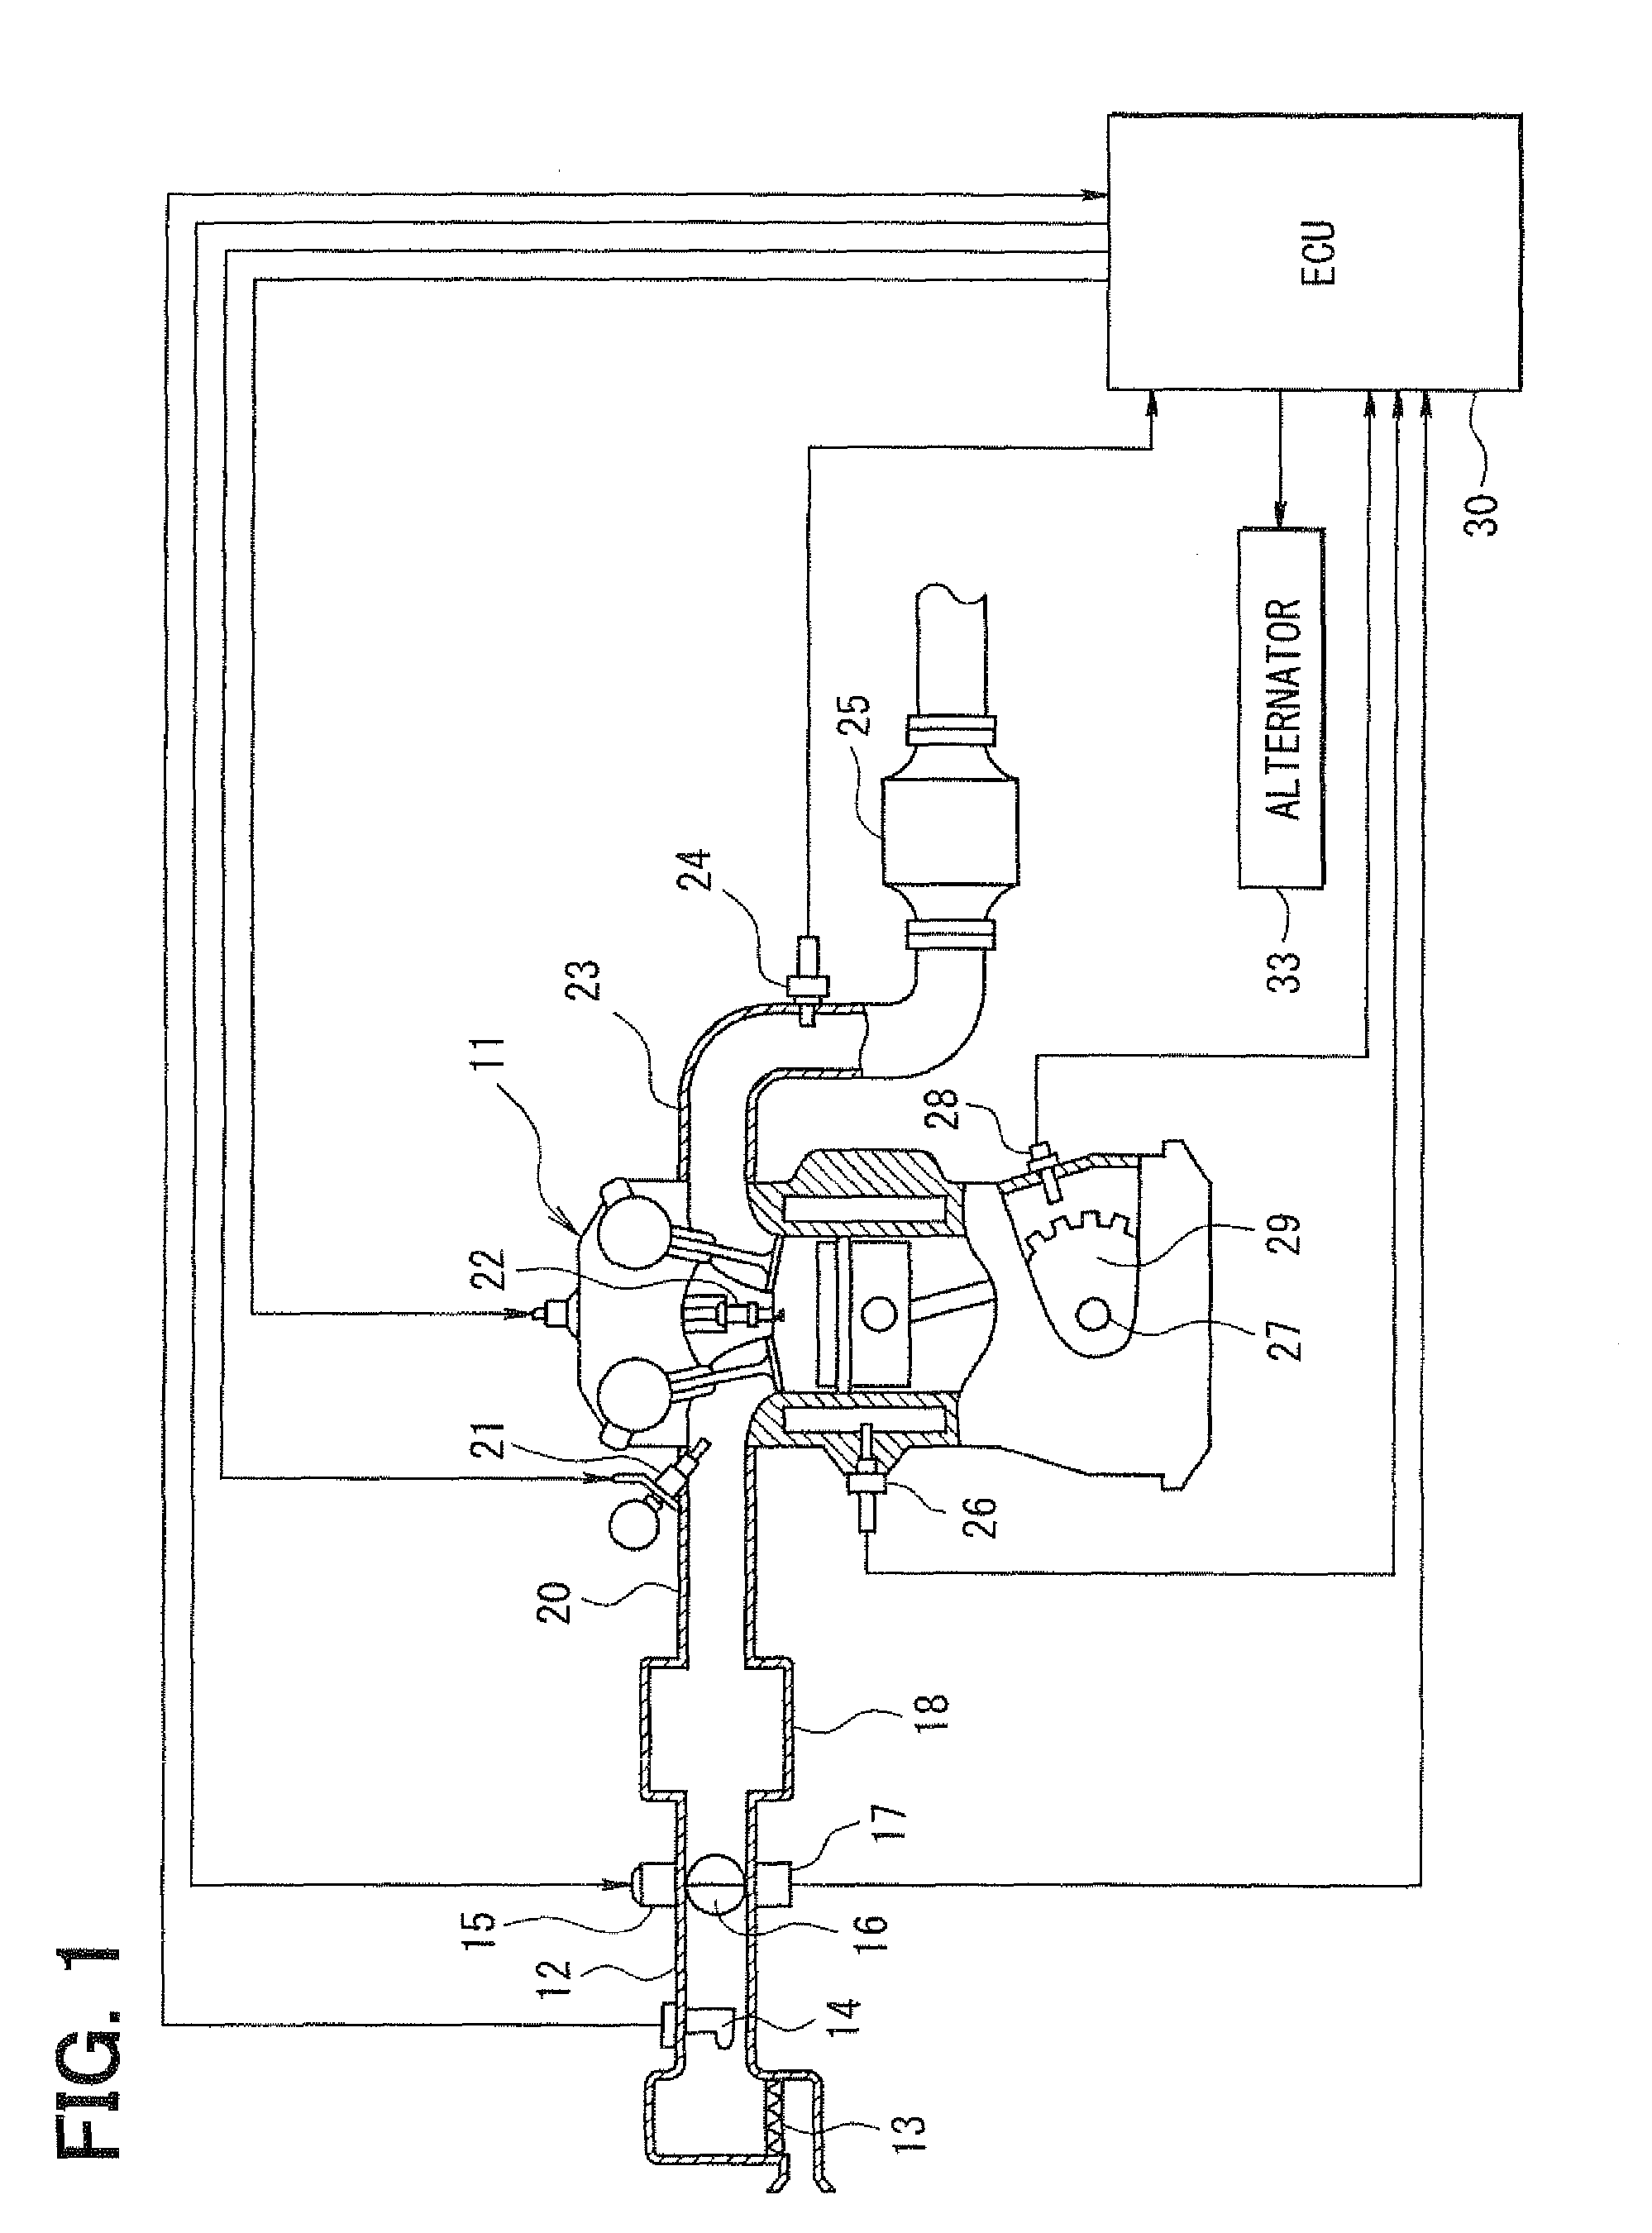 Engine stop control device